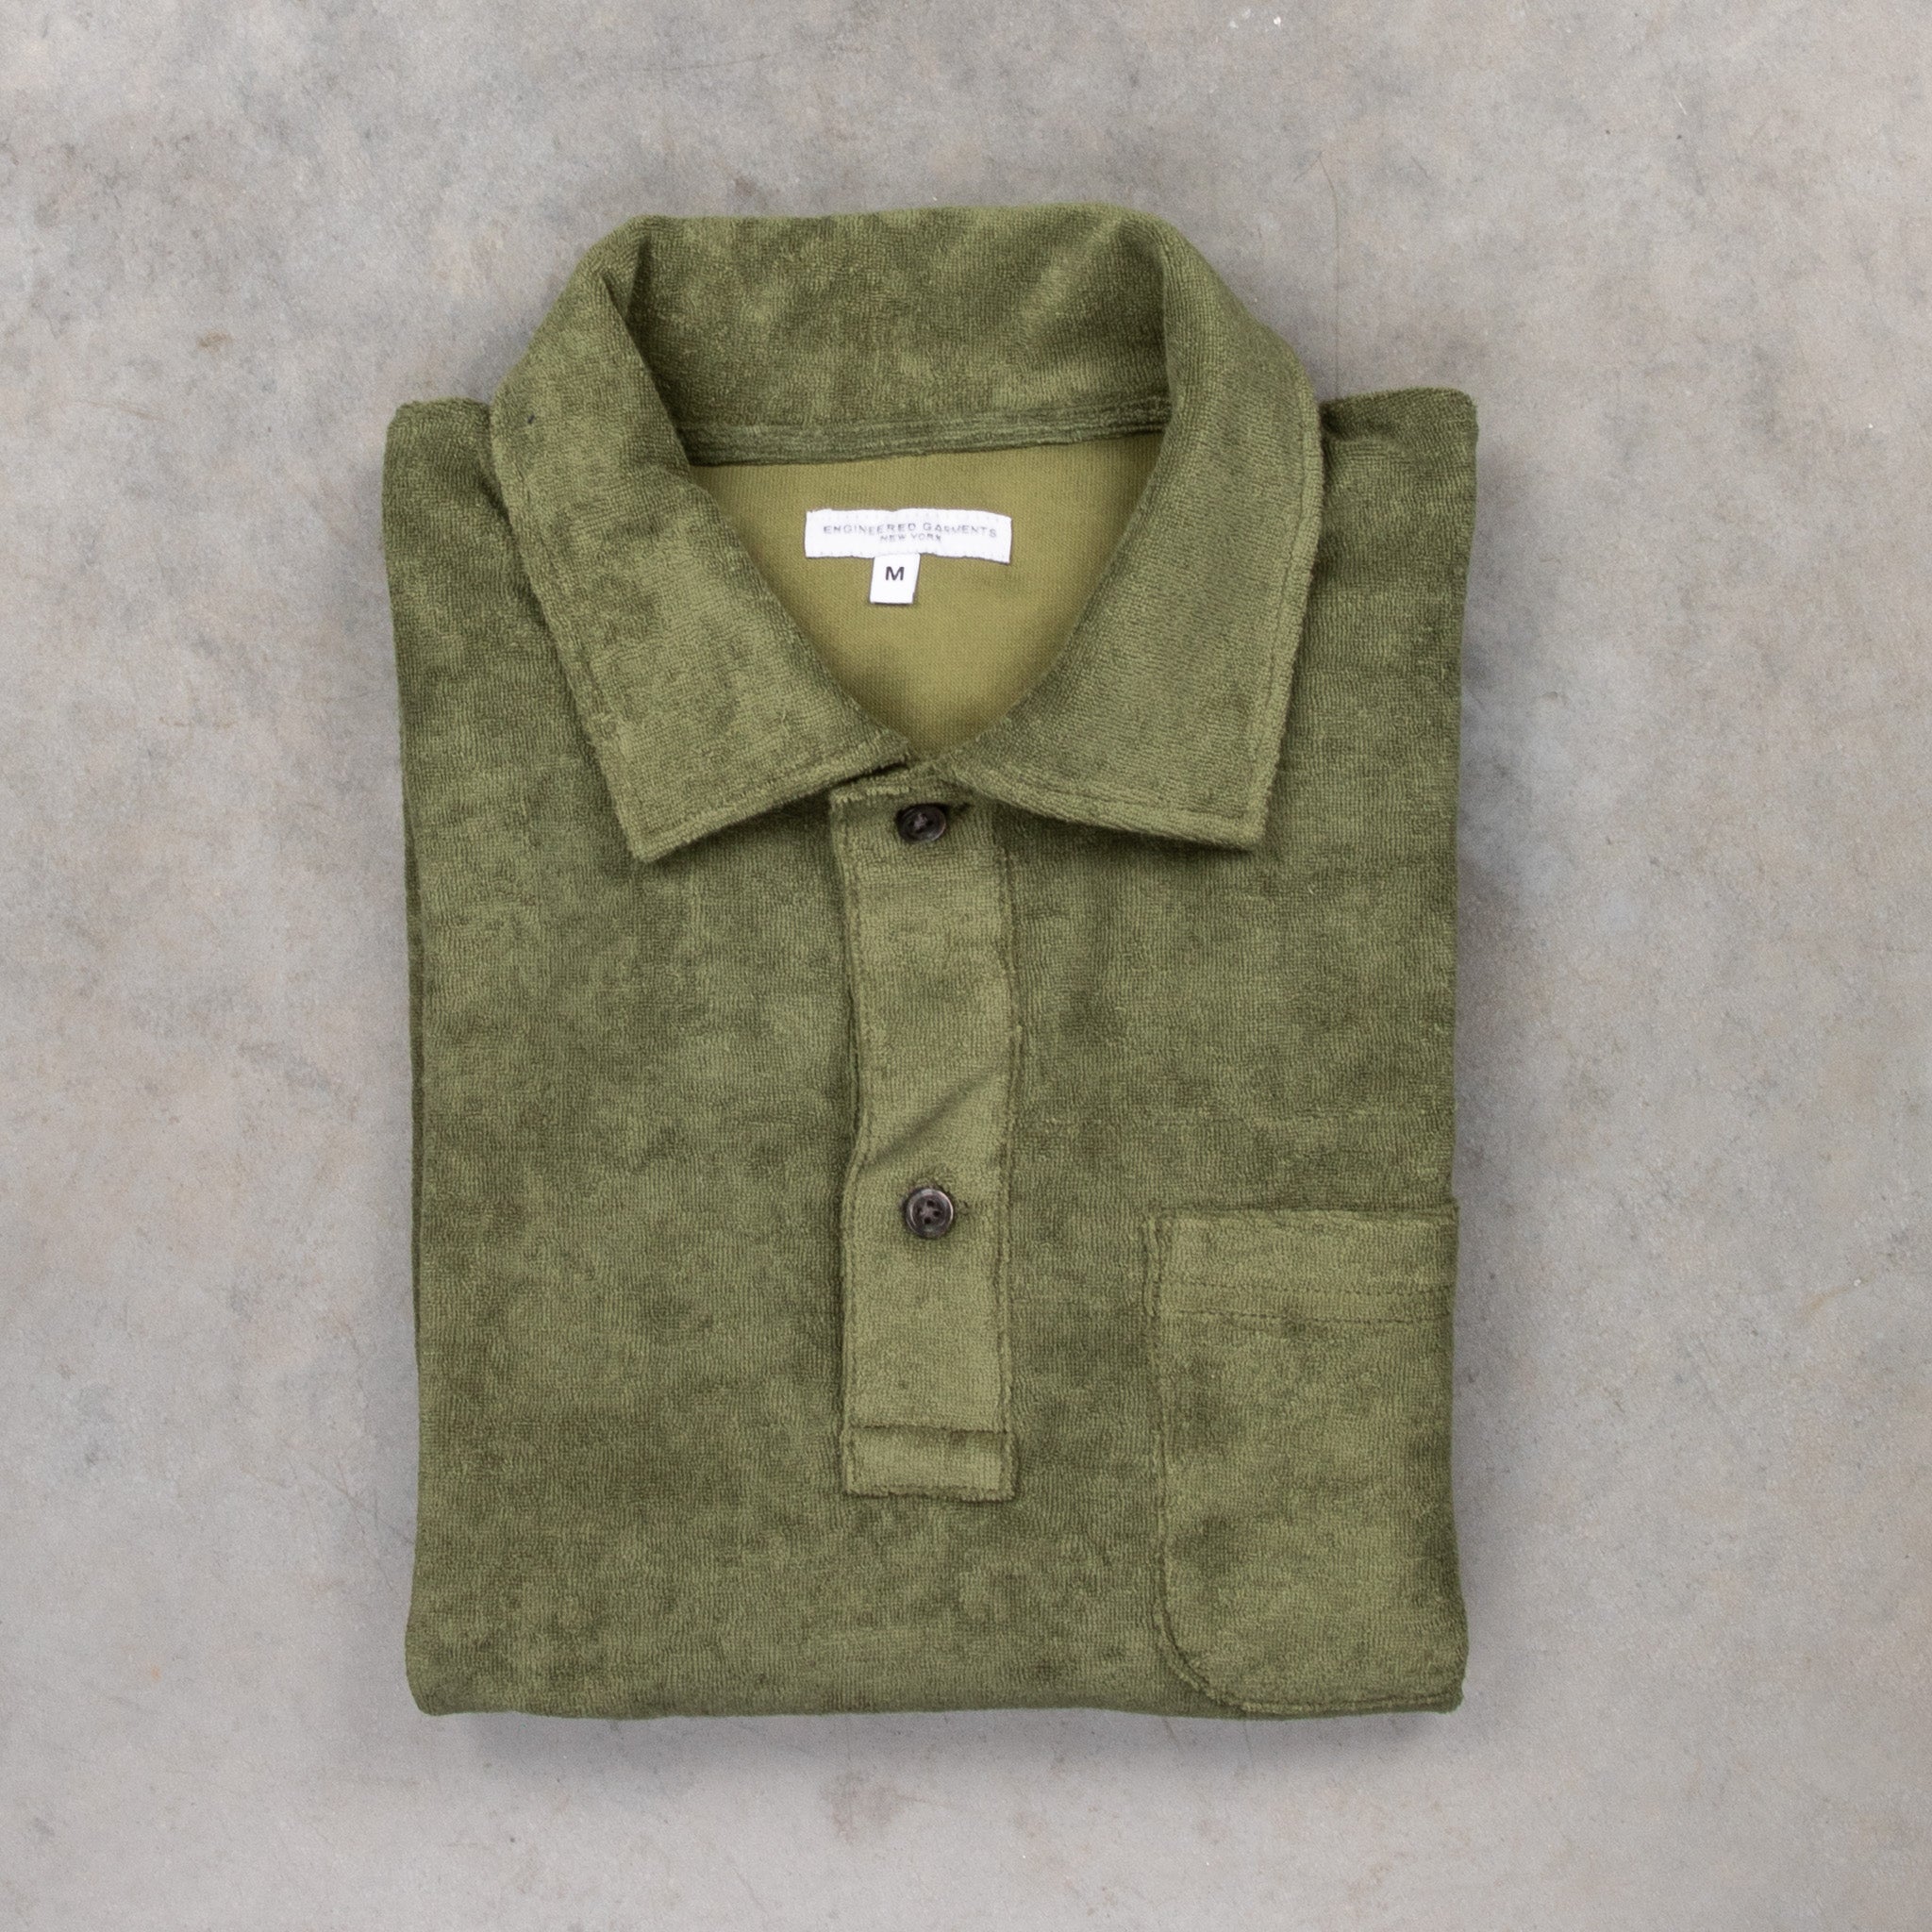 Engineered Garments Polo CP Velour Olive